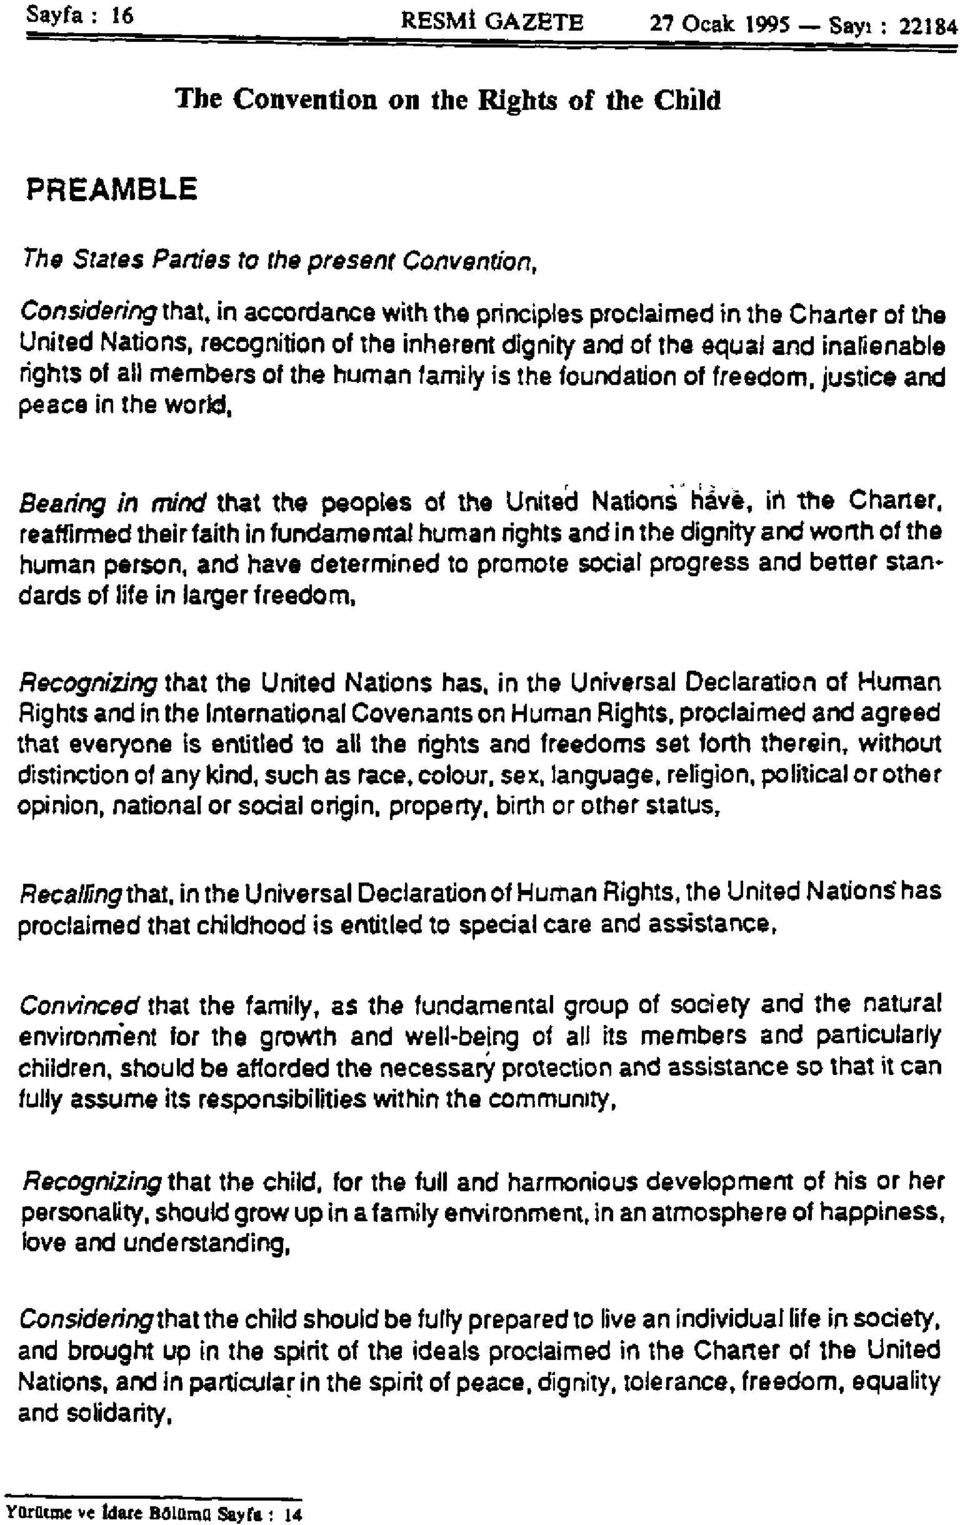 and peace in the world, Bearing in mind that the peoples of the United Nations have, in the Charter, reaffirmed their faith in fundamental human rights and in the dignity and worth of the human